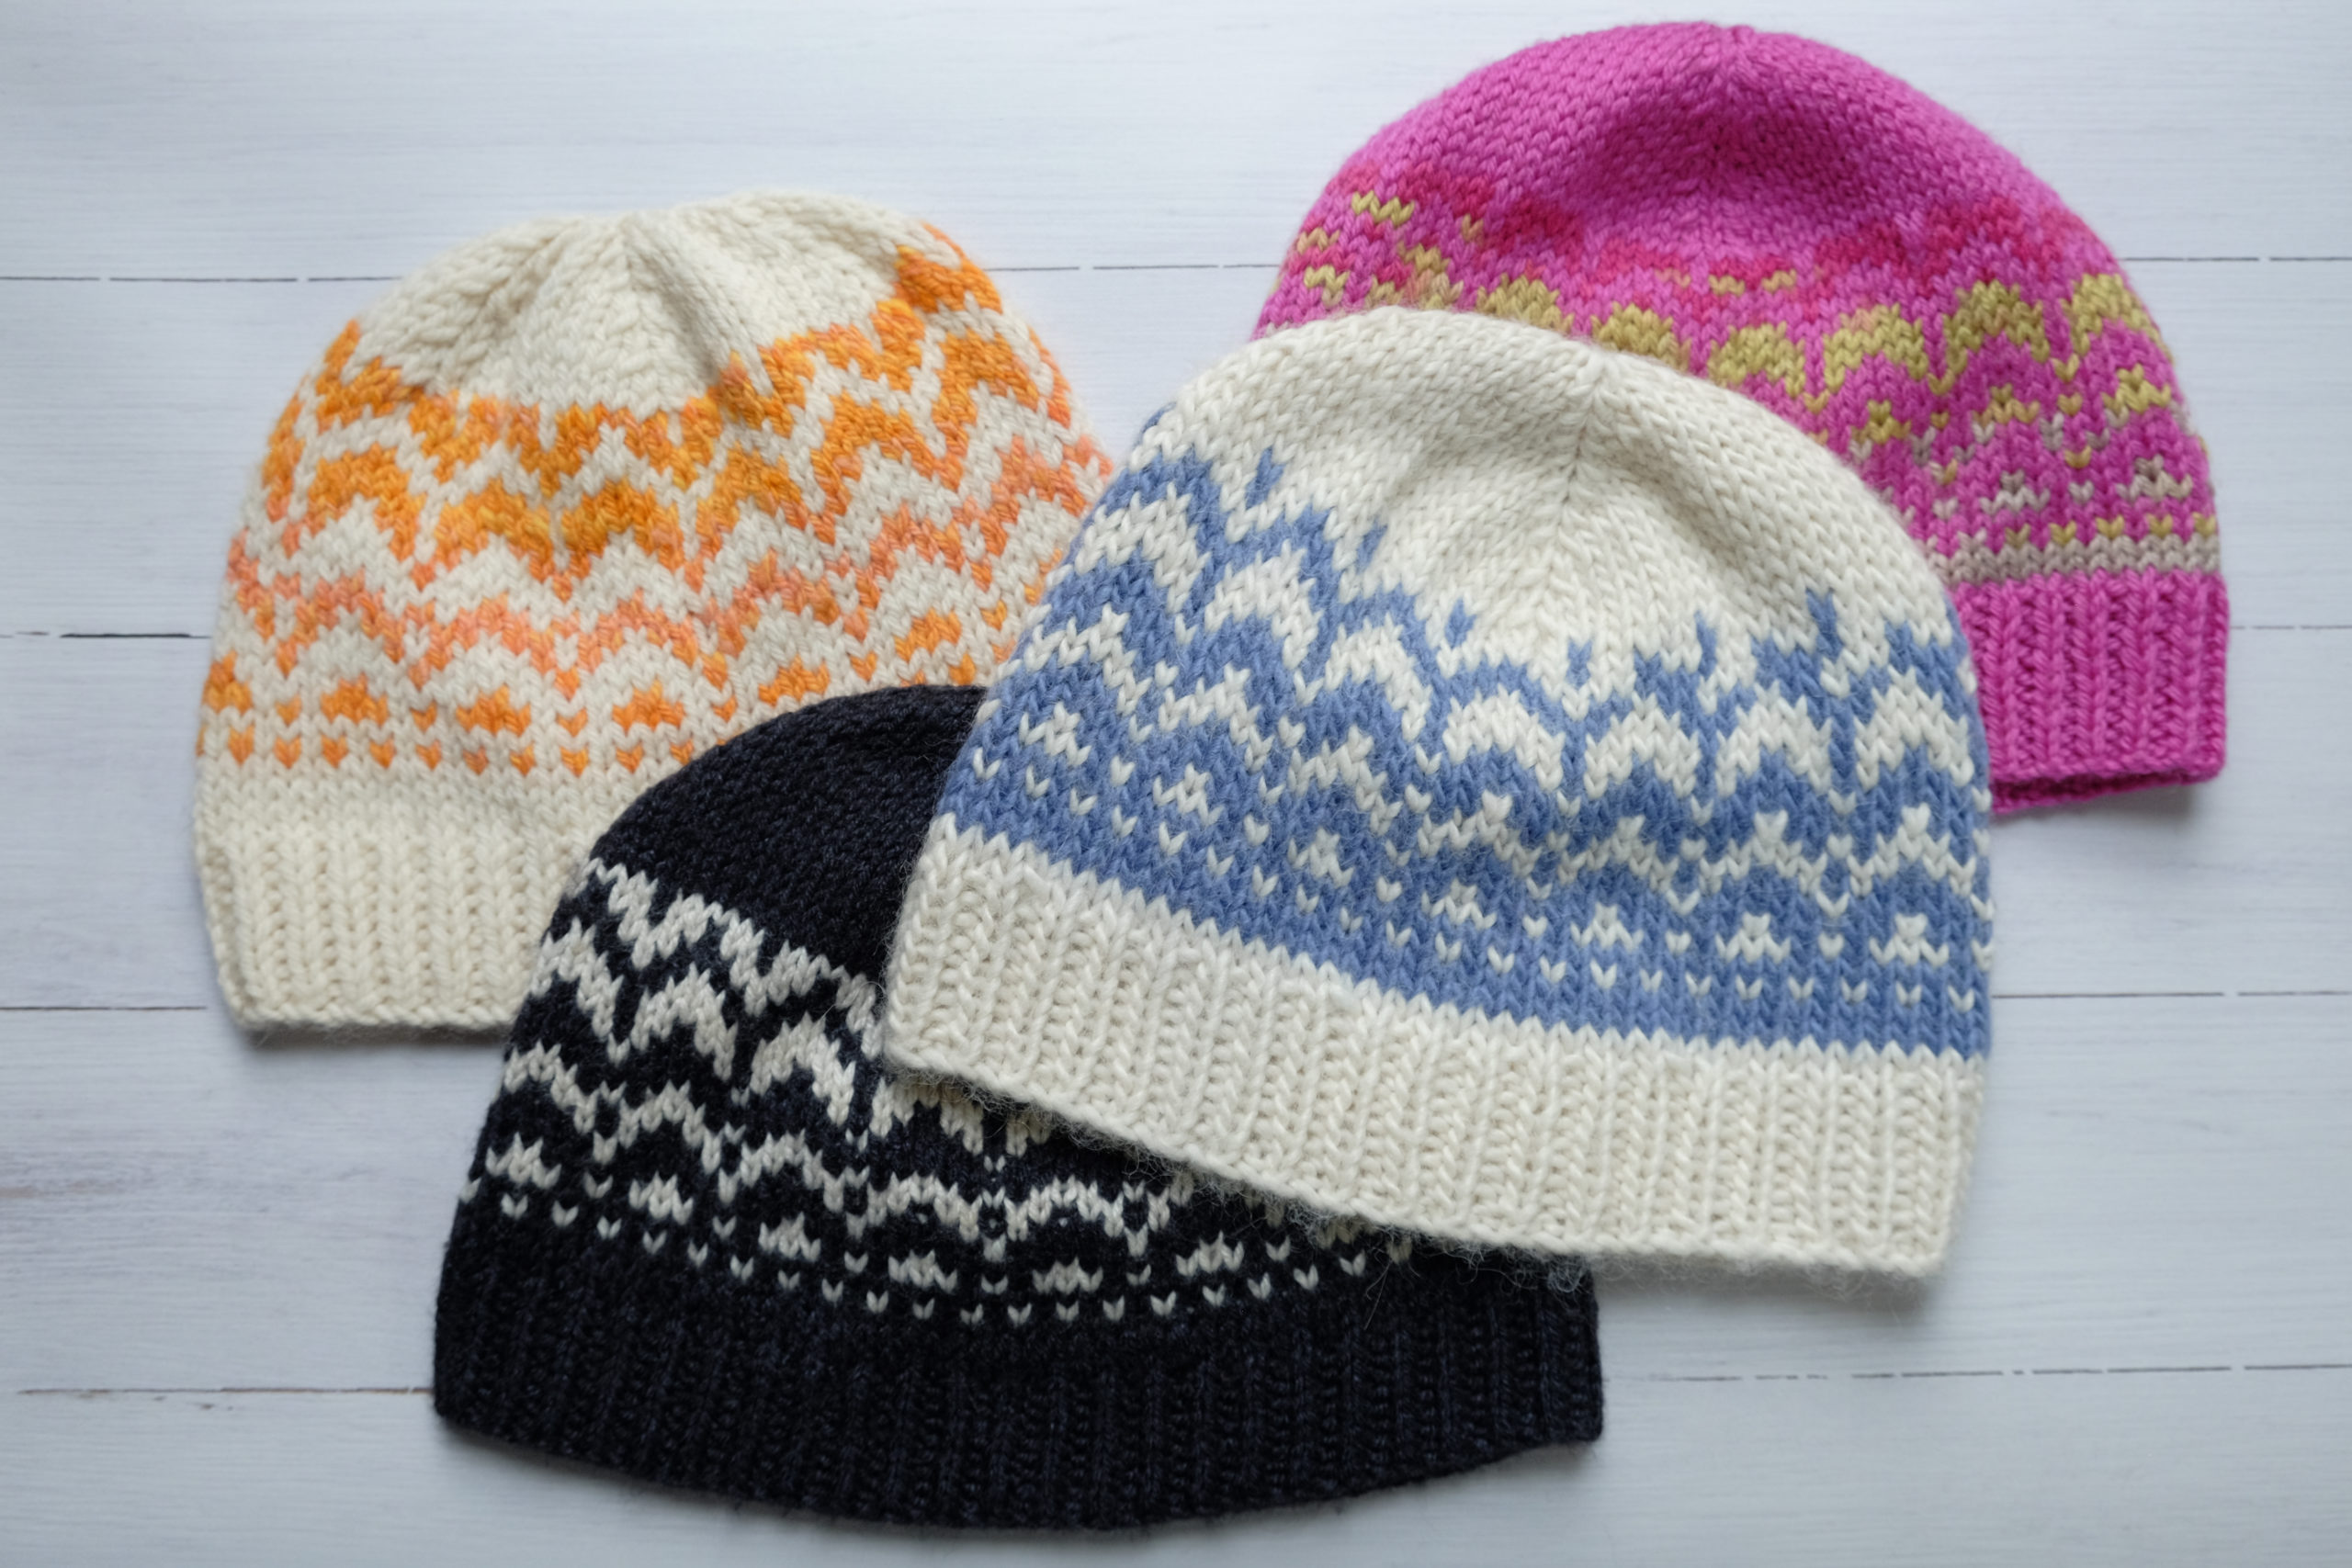 Knit Hats, Beanies, and Tams - Ten simple patterns to knit | Andrea ...